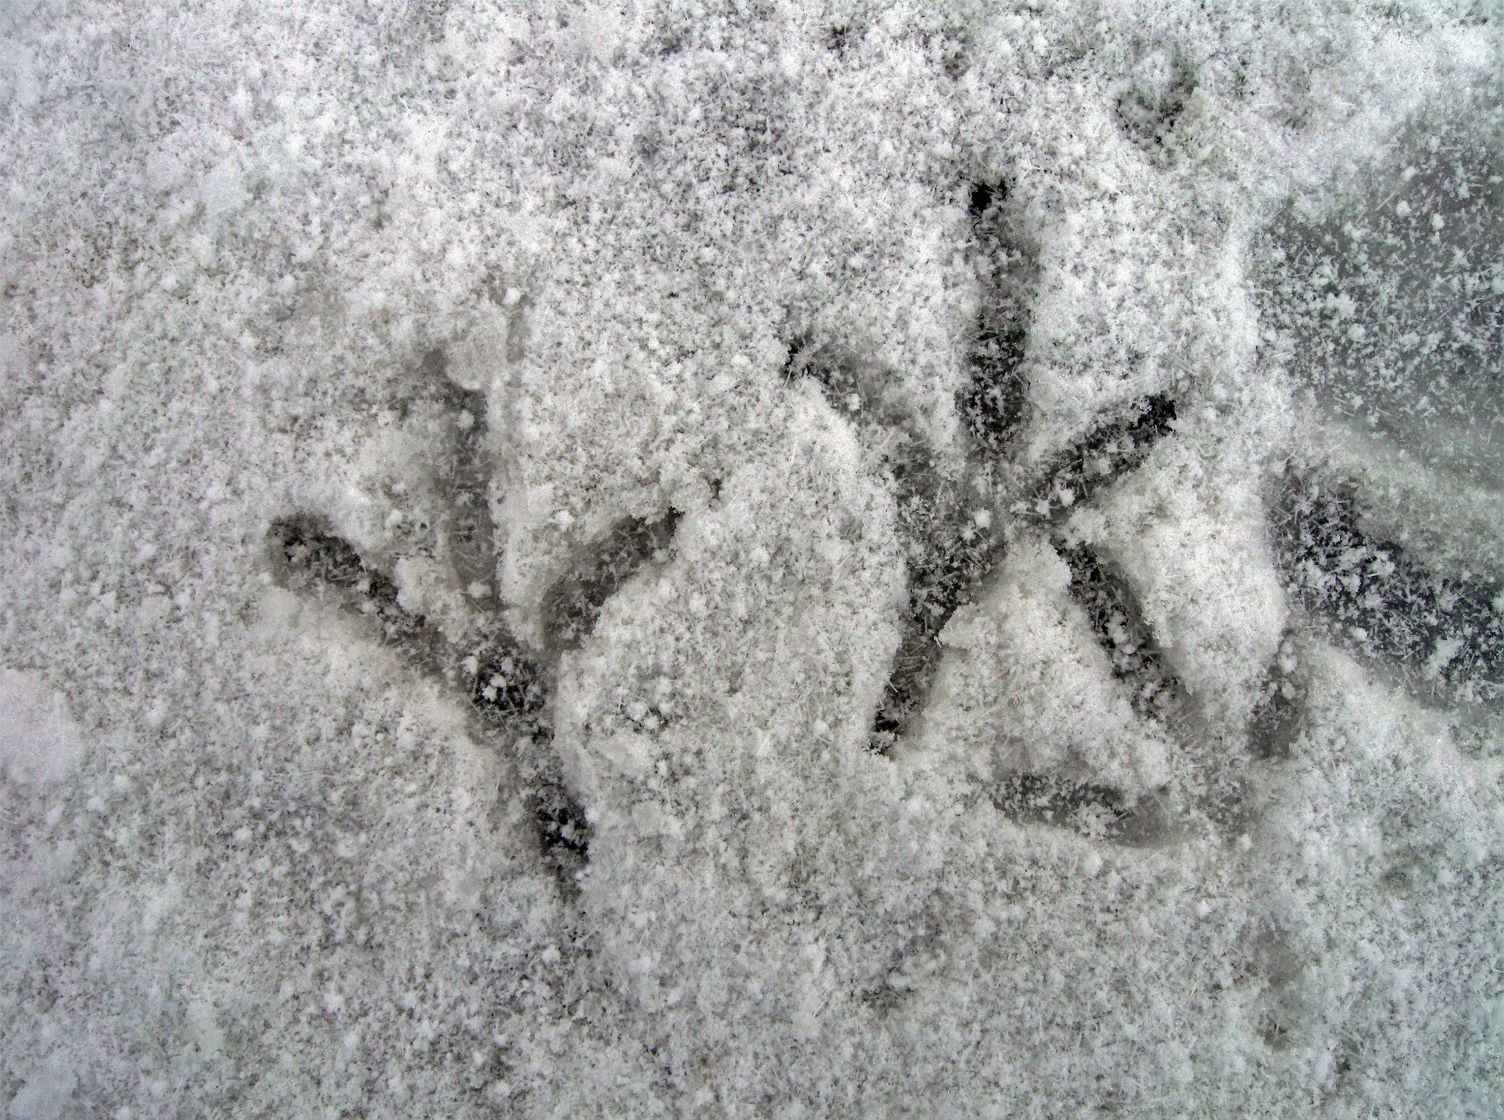 Backyard Birds Slideshow: A pair of bird tracks on a light layer of snow with a third print behind the pair.